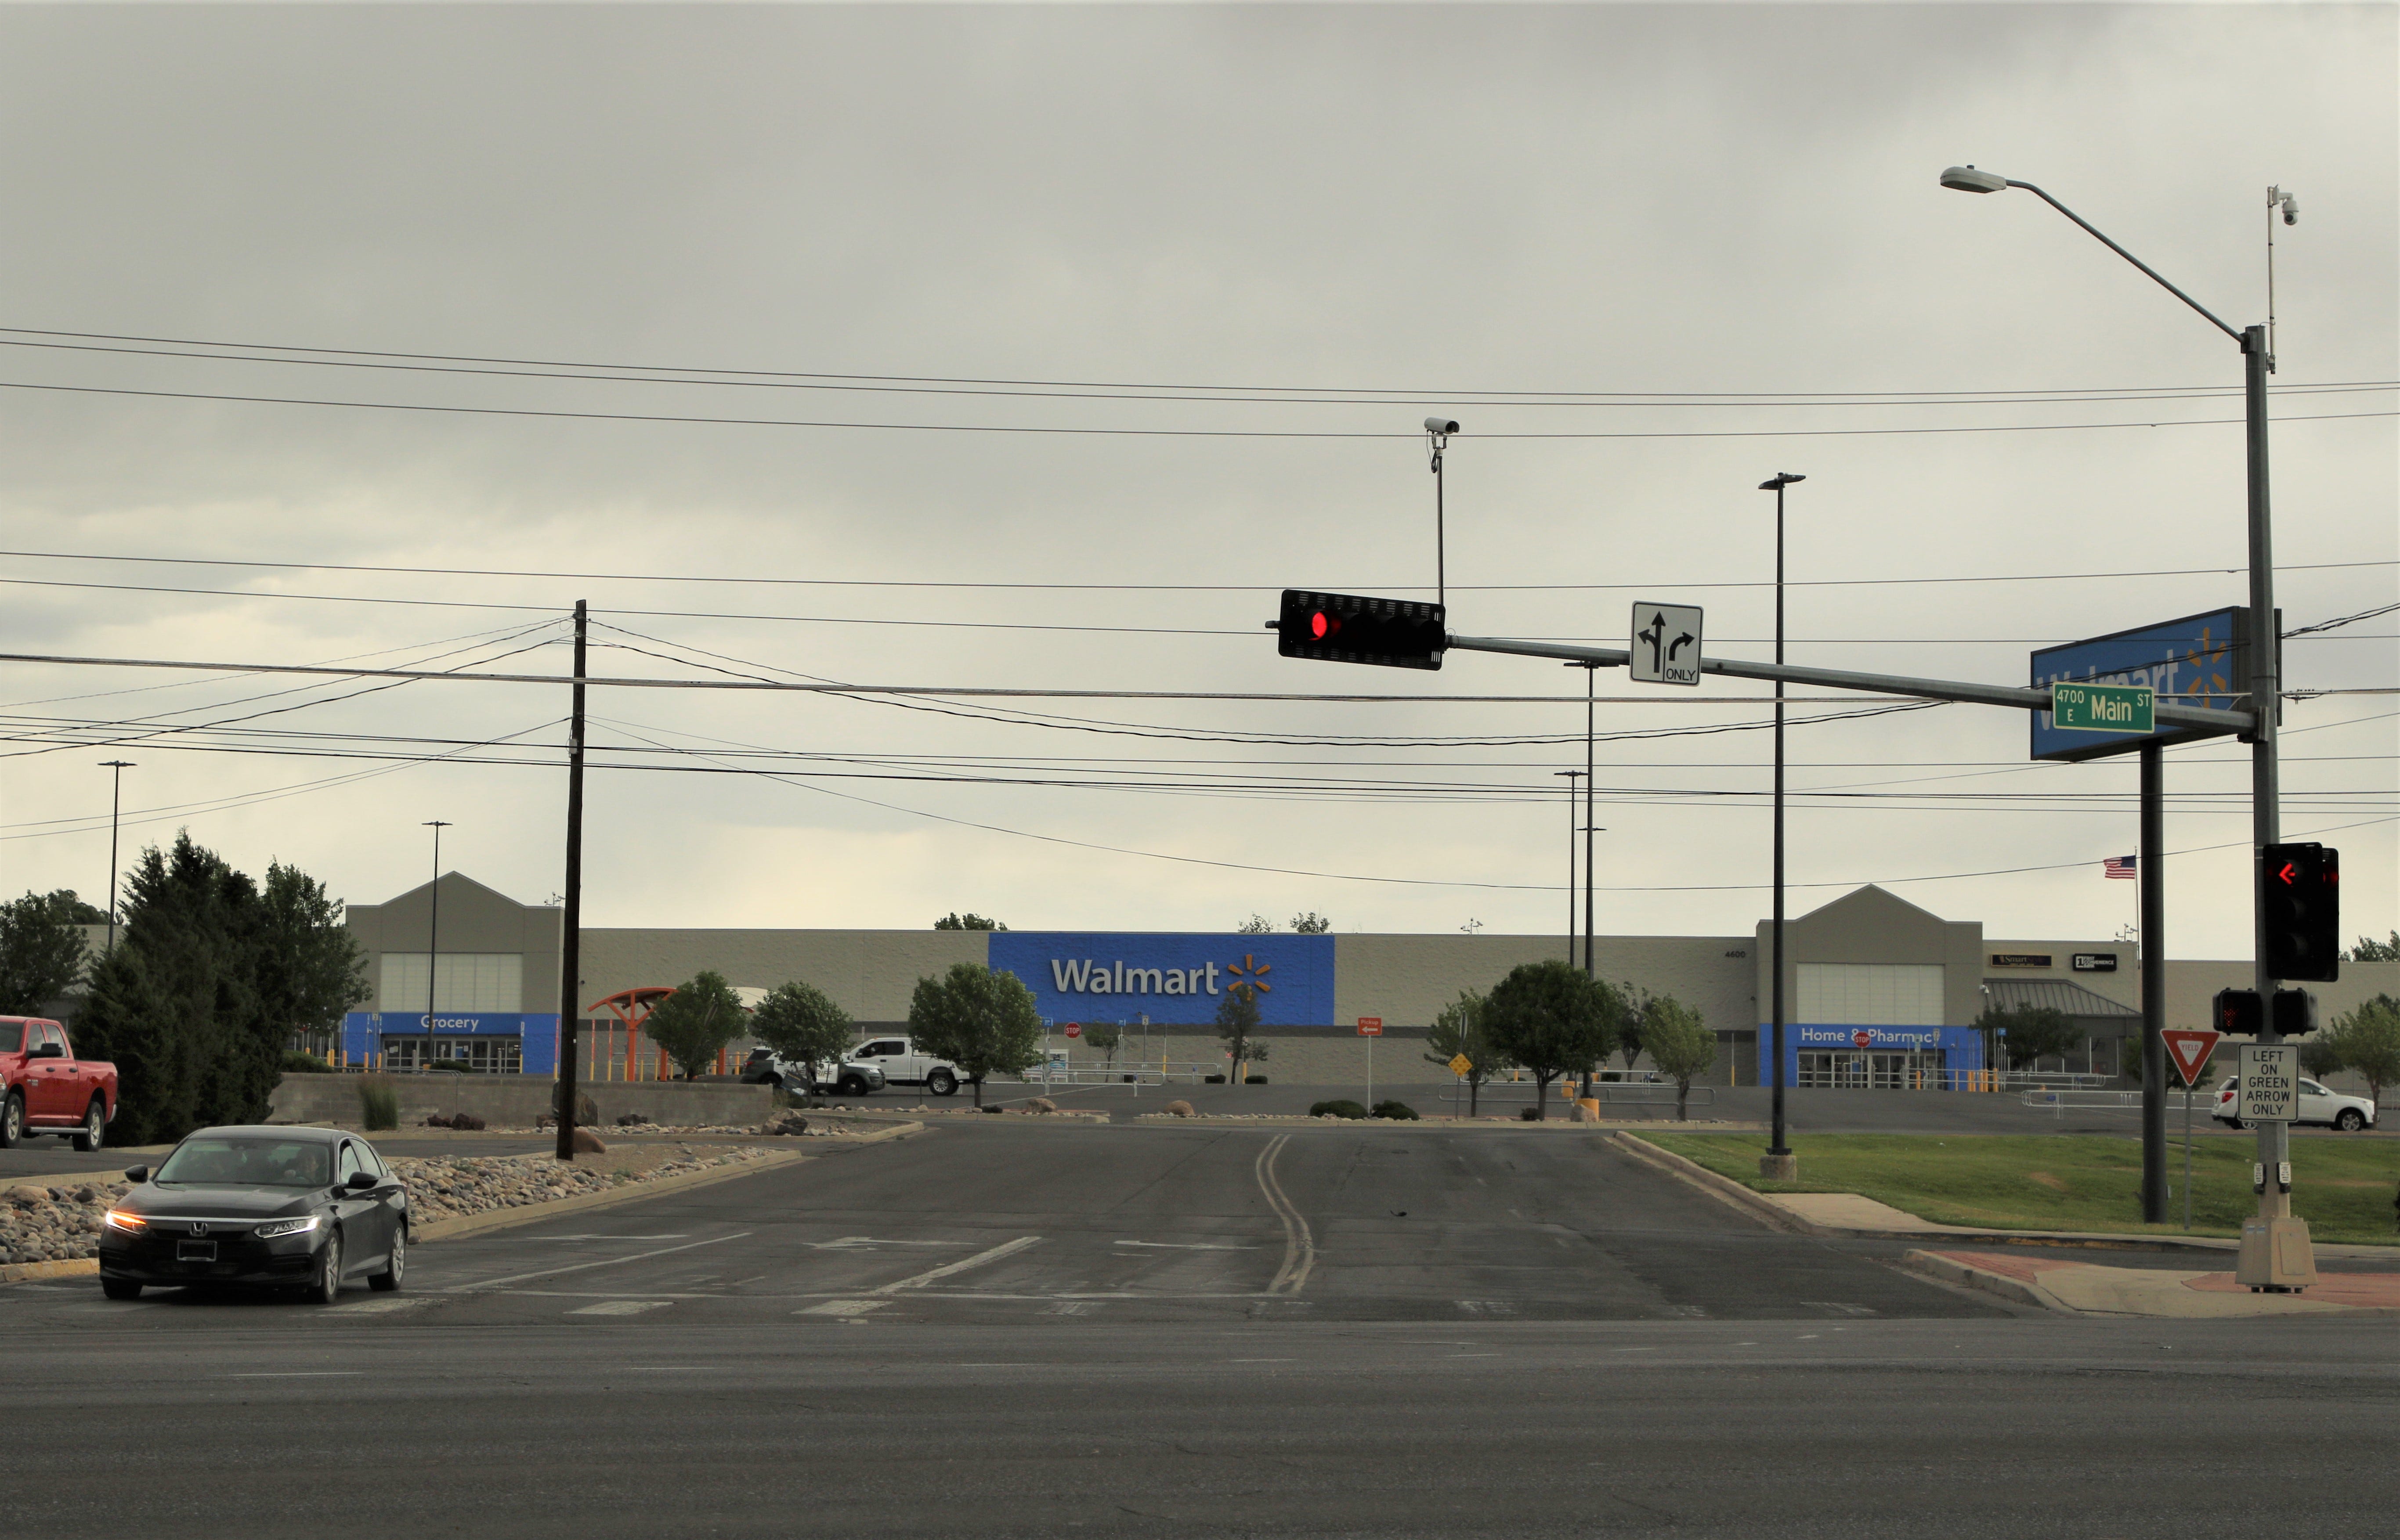 Walmart, 4600 E. Main St. in Farmington, was among the major retailers to close early on June 1.